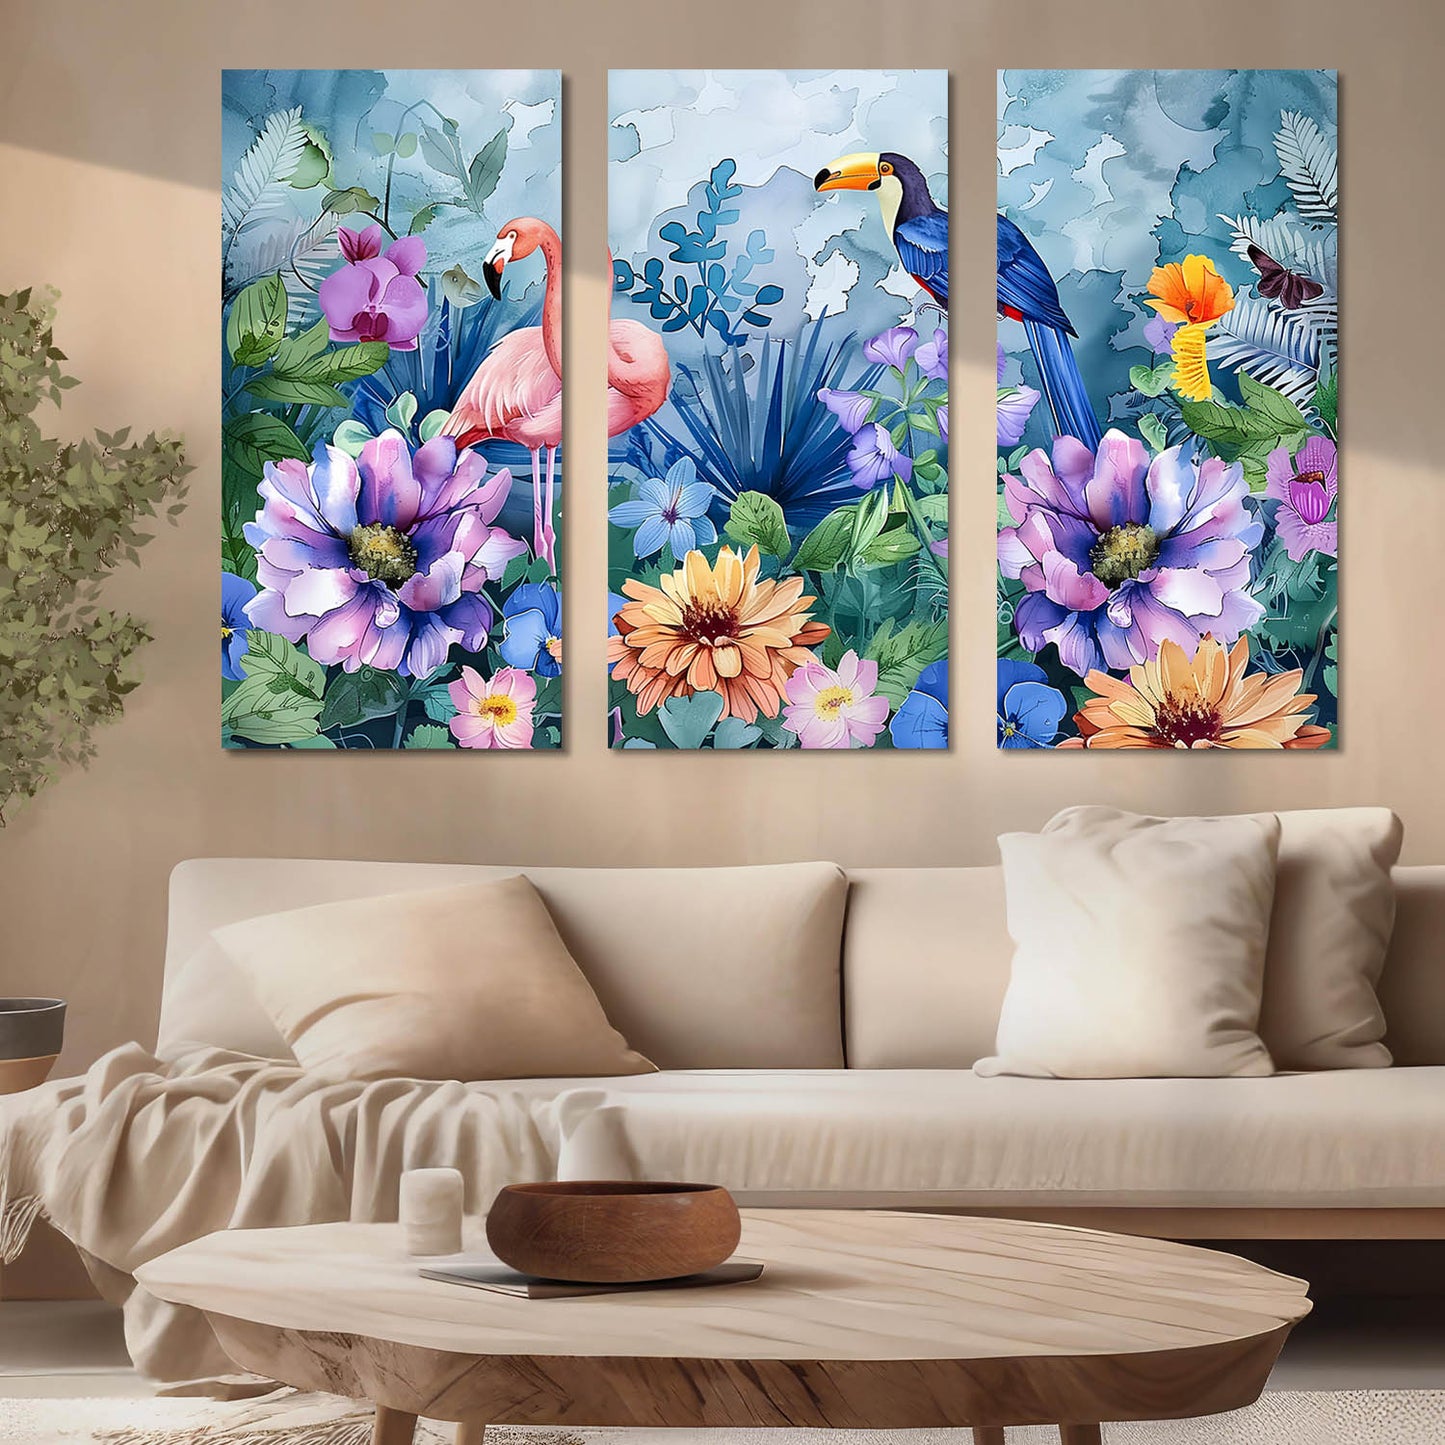 Floral Wall Art Canvas, Wall Painting for Living Room Wall Decoration